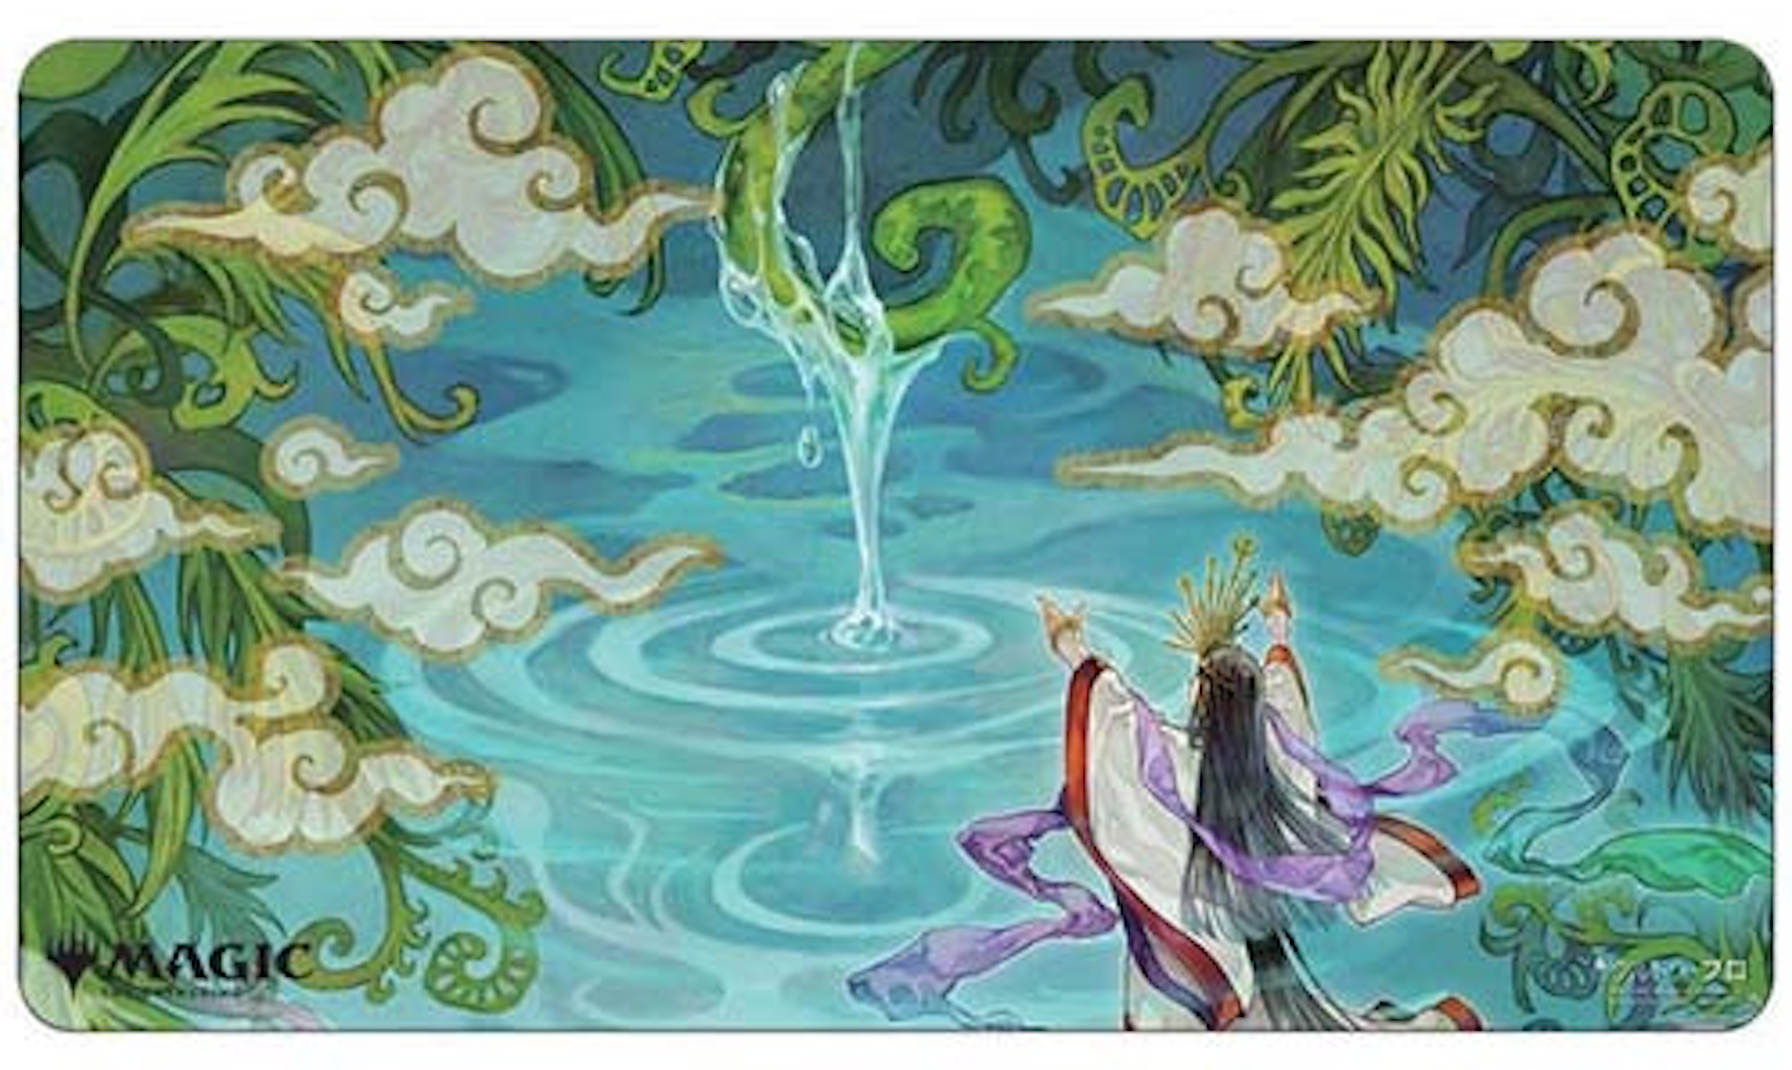 Magic the Gathering Playmat: Japanese Mystical Archive - Growth Spiral